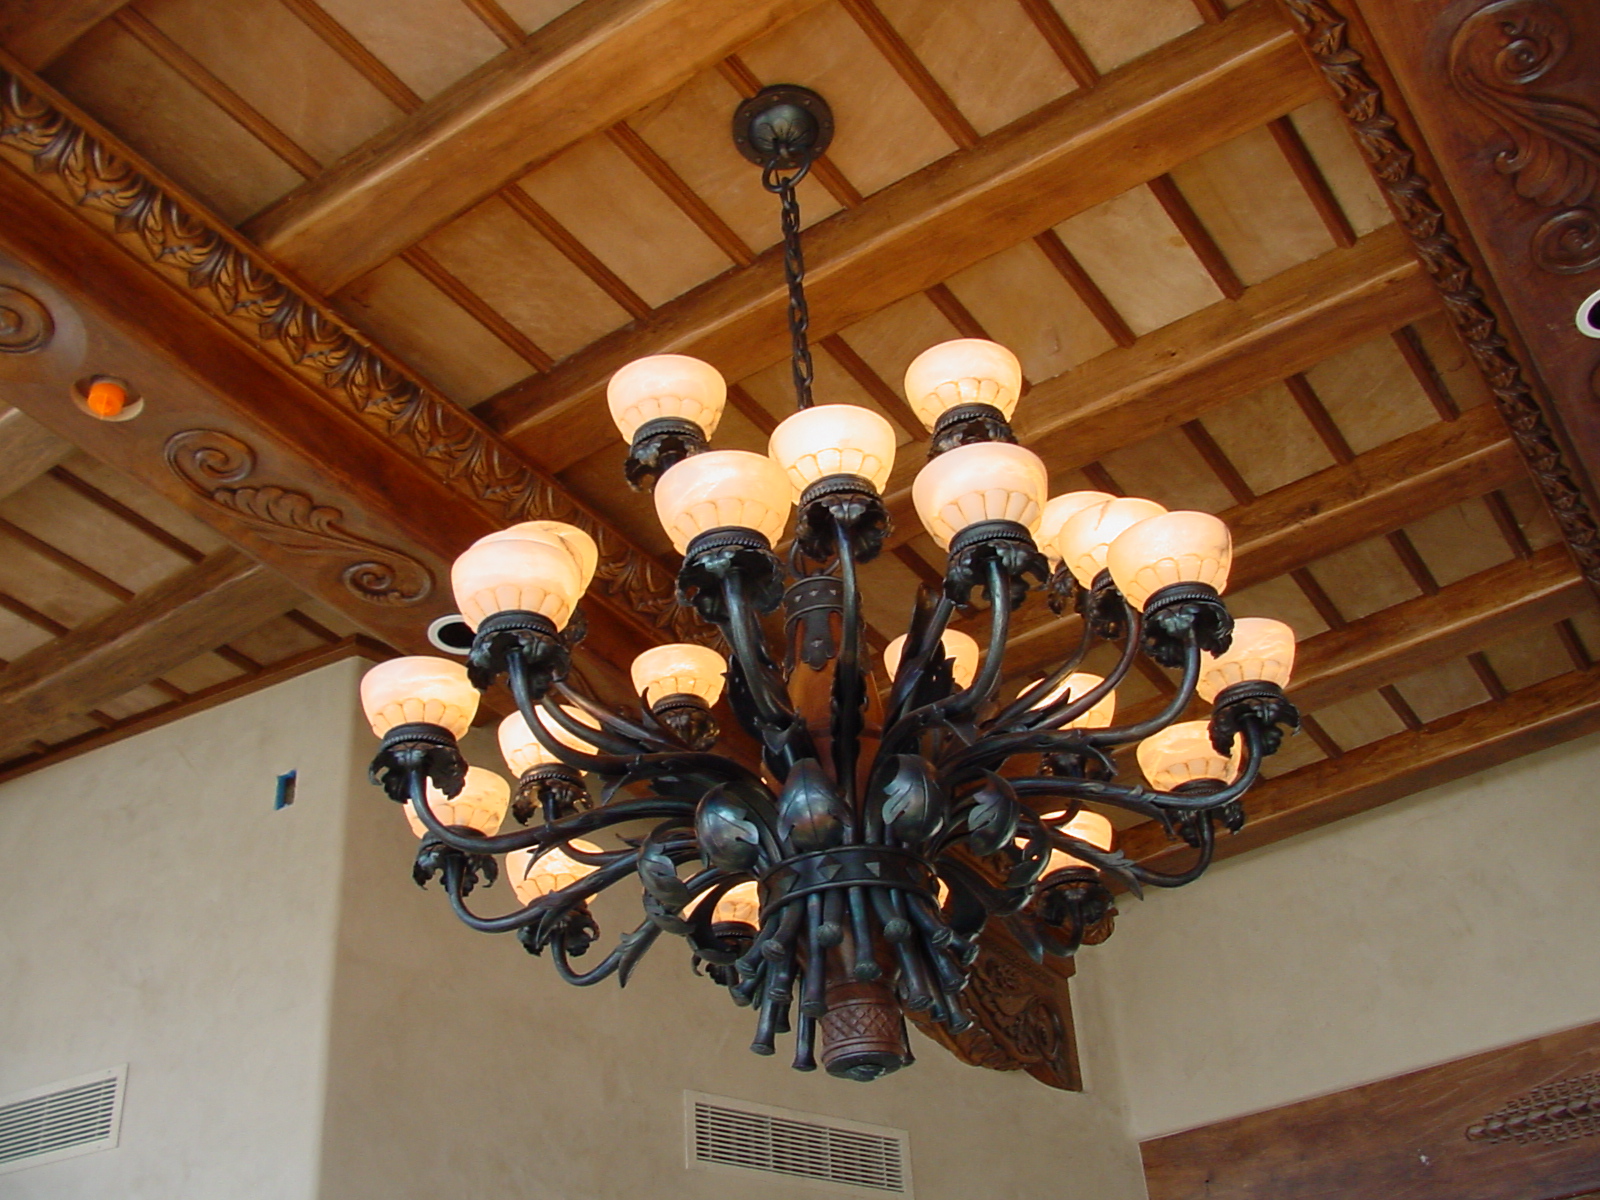 1 of 2 Room fixtures and forged for a private residence Scottsdale, AZ. By Chad and Brad Gunter. 24 arms with alabaster globes. approx 250 lbs. Design by Morelli